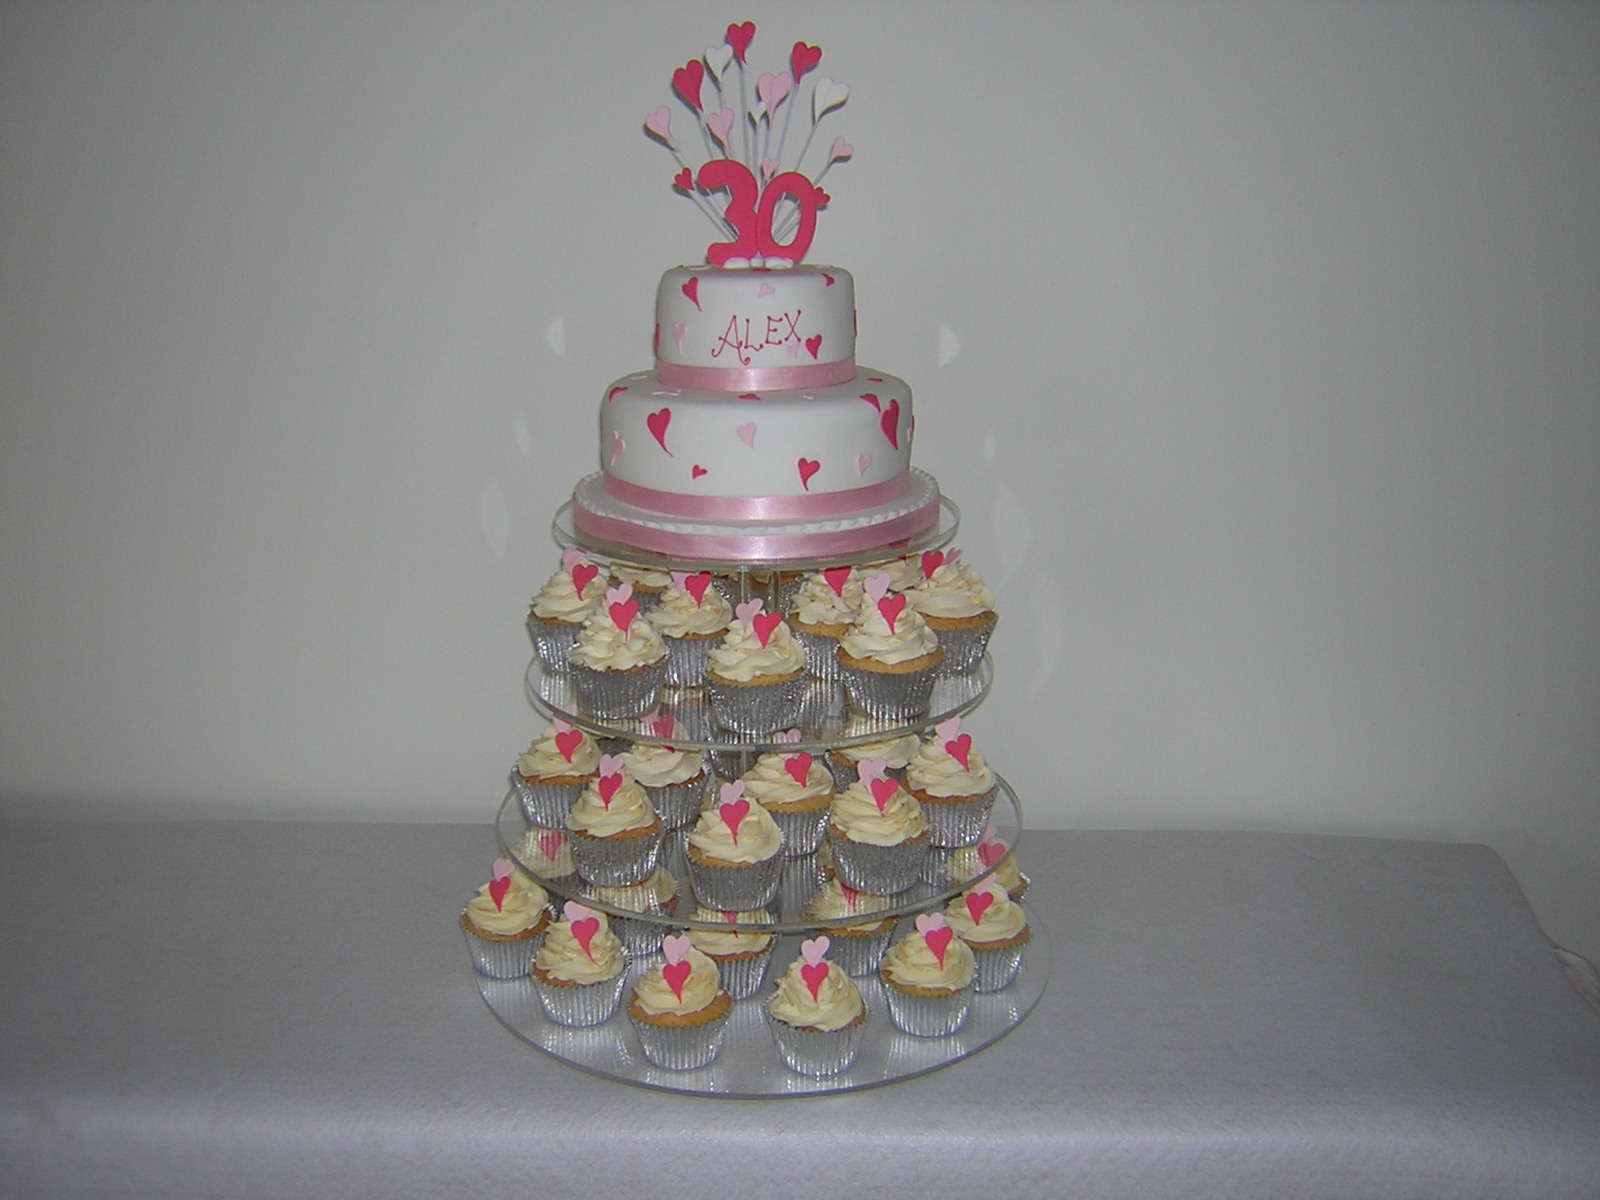 2 Tier Cake with Cupcakes